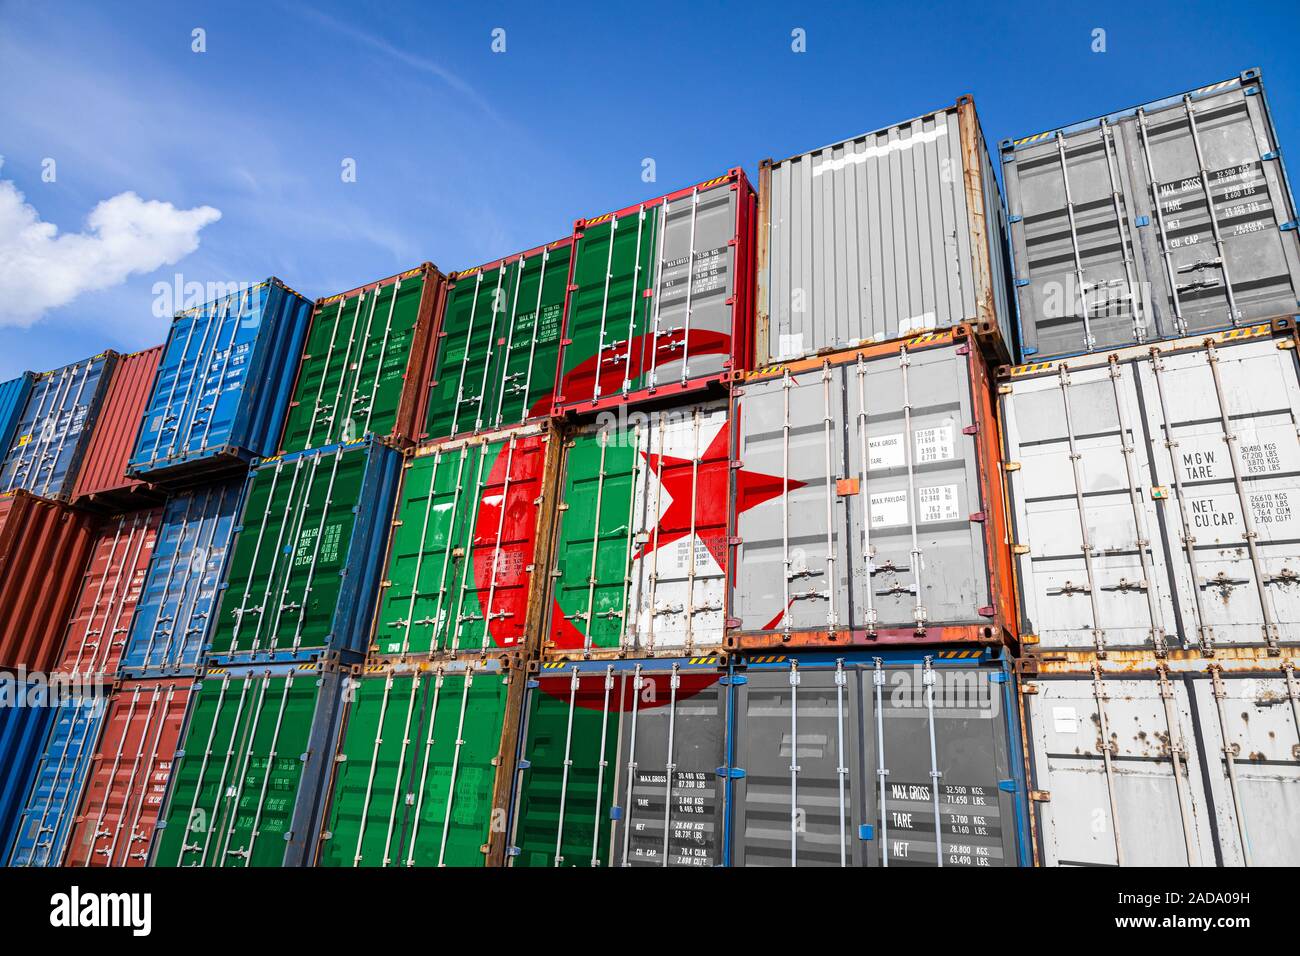 https://c8.alamy.com/comp/2ADA09H/the-national-flag-of-algeria-on-a-large-number-of-metal-containers-for-storing-goods-stacked-in-rows-on-top-of-each-other-conception-of-storage-of-go-2ADA09H.jpg